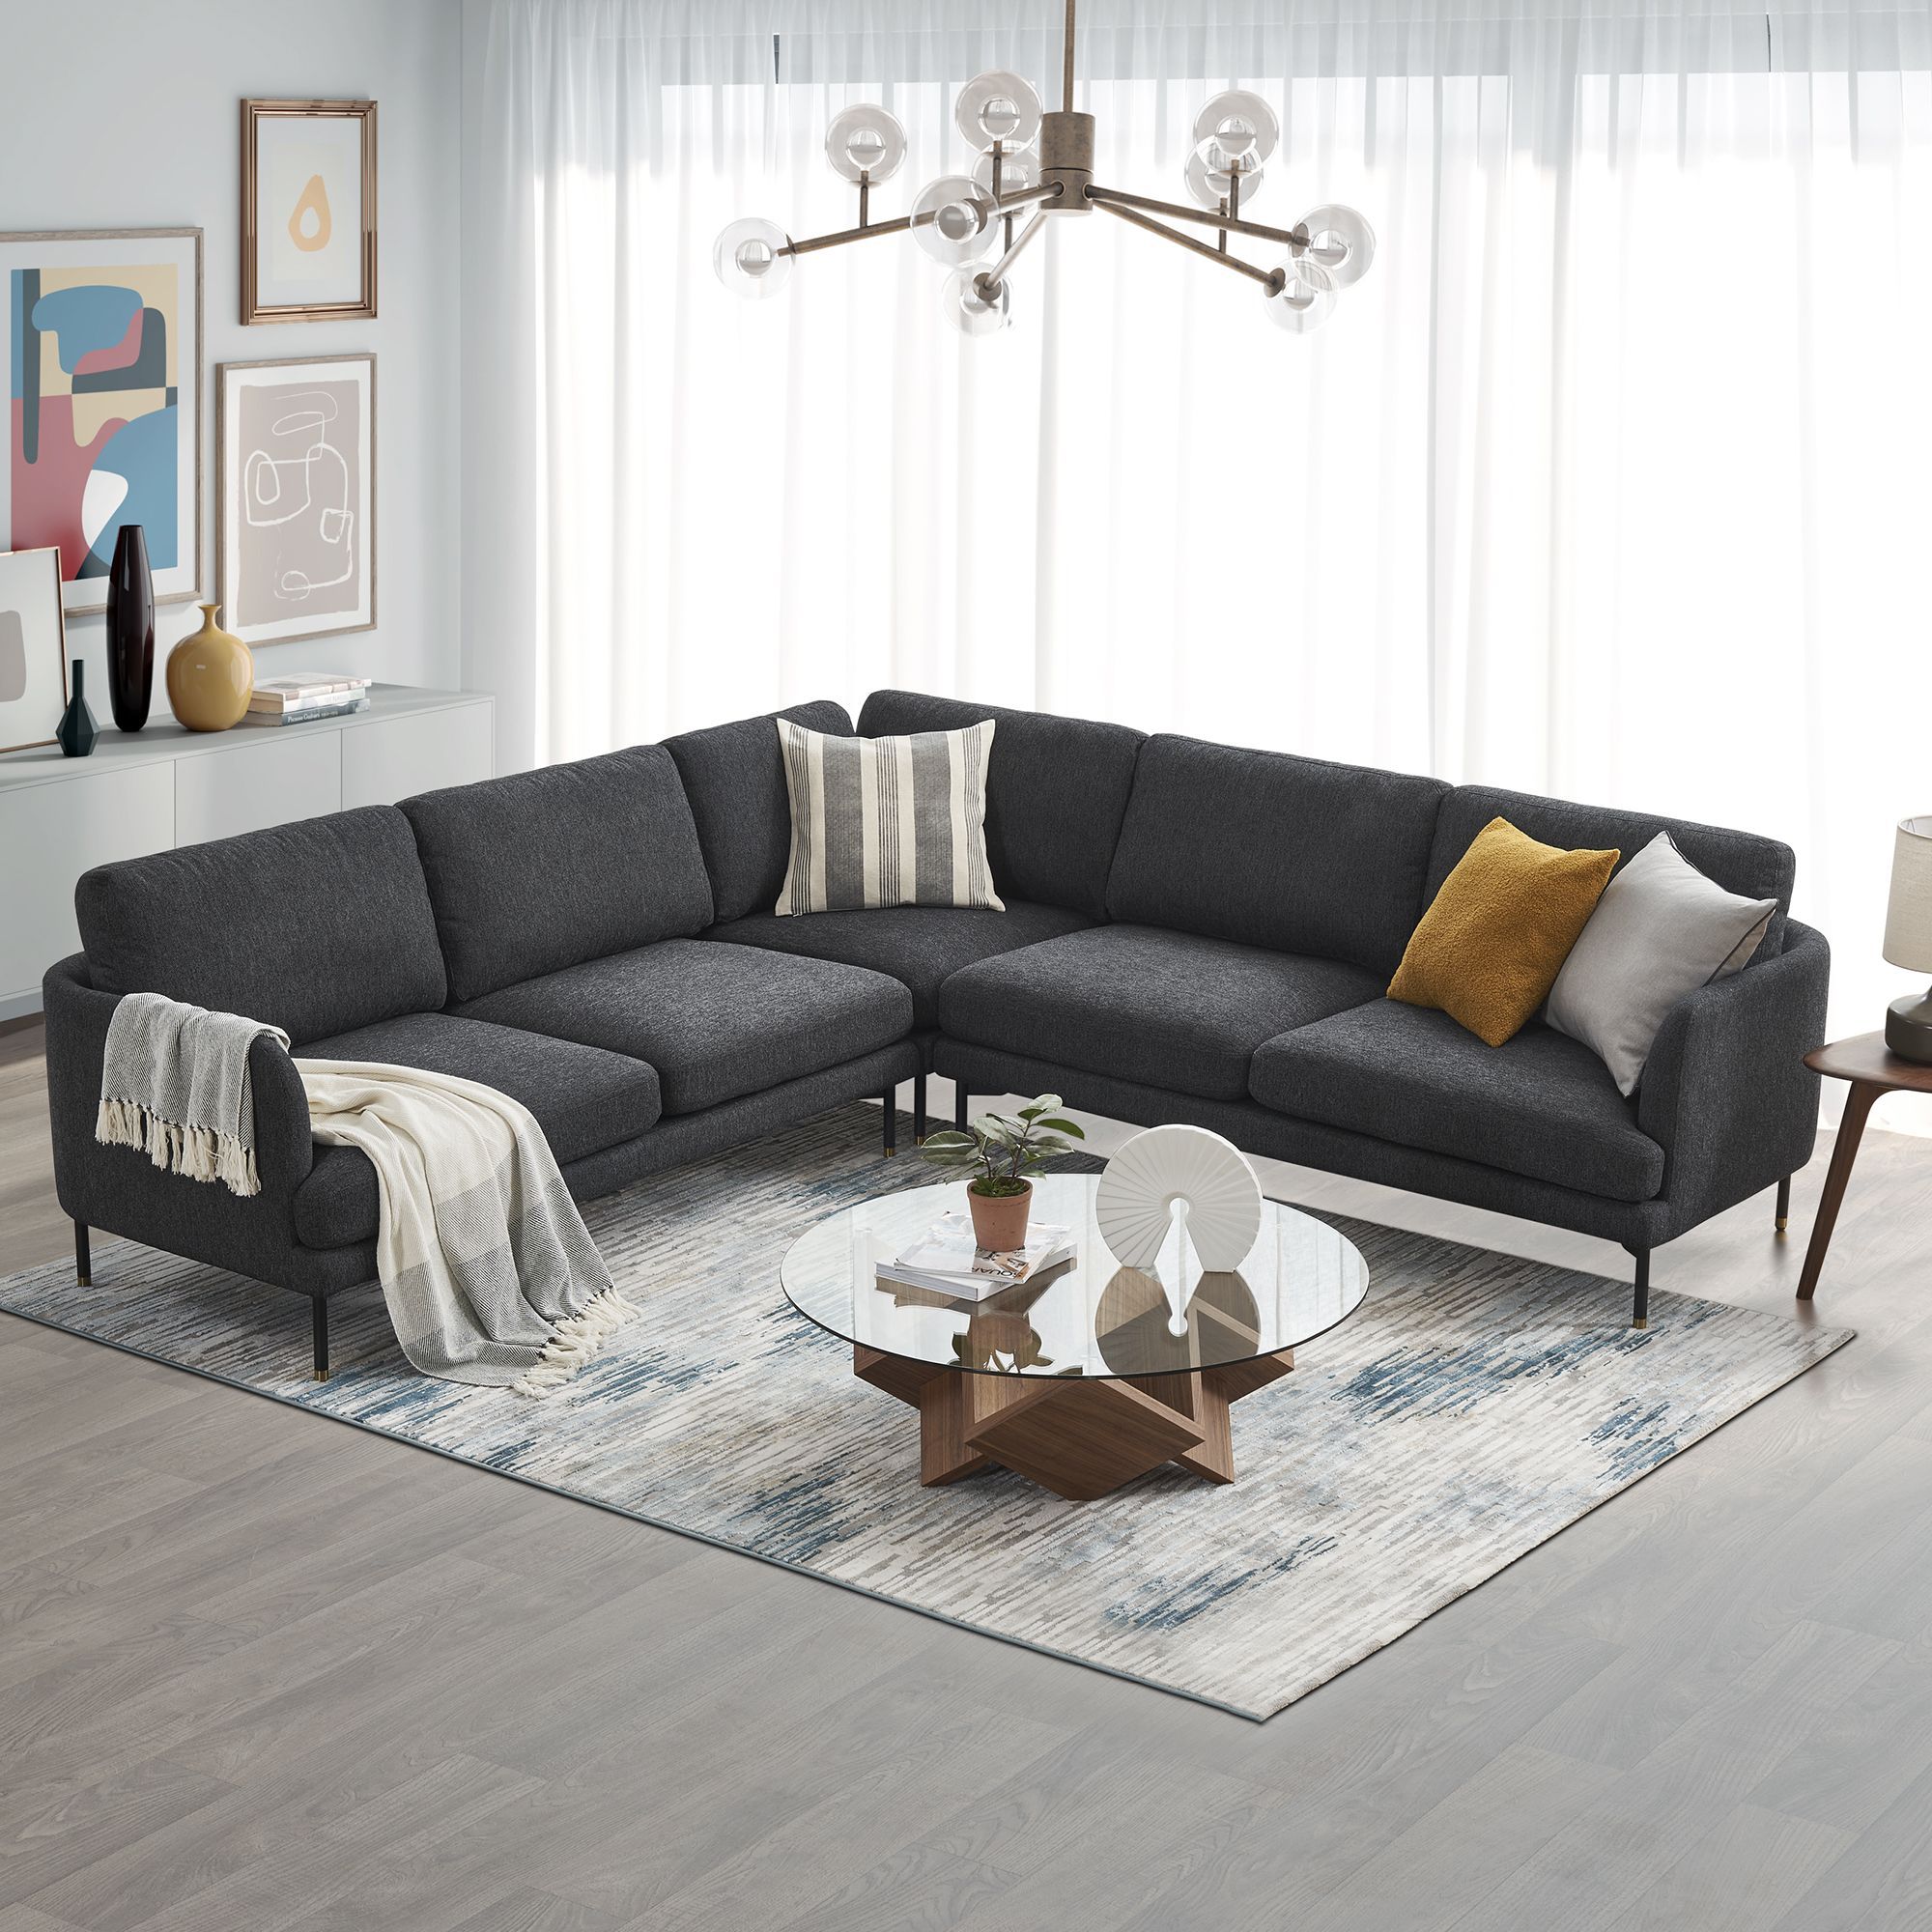 Pebble L Shape Sectional Sofa | Castlery | Dark Grey Sofa Living Room, Grey  Sofa Living Room, Living Room Color Schemes Intended For Dark Gray Sectional Sofas (View 10 of 15)